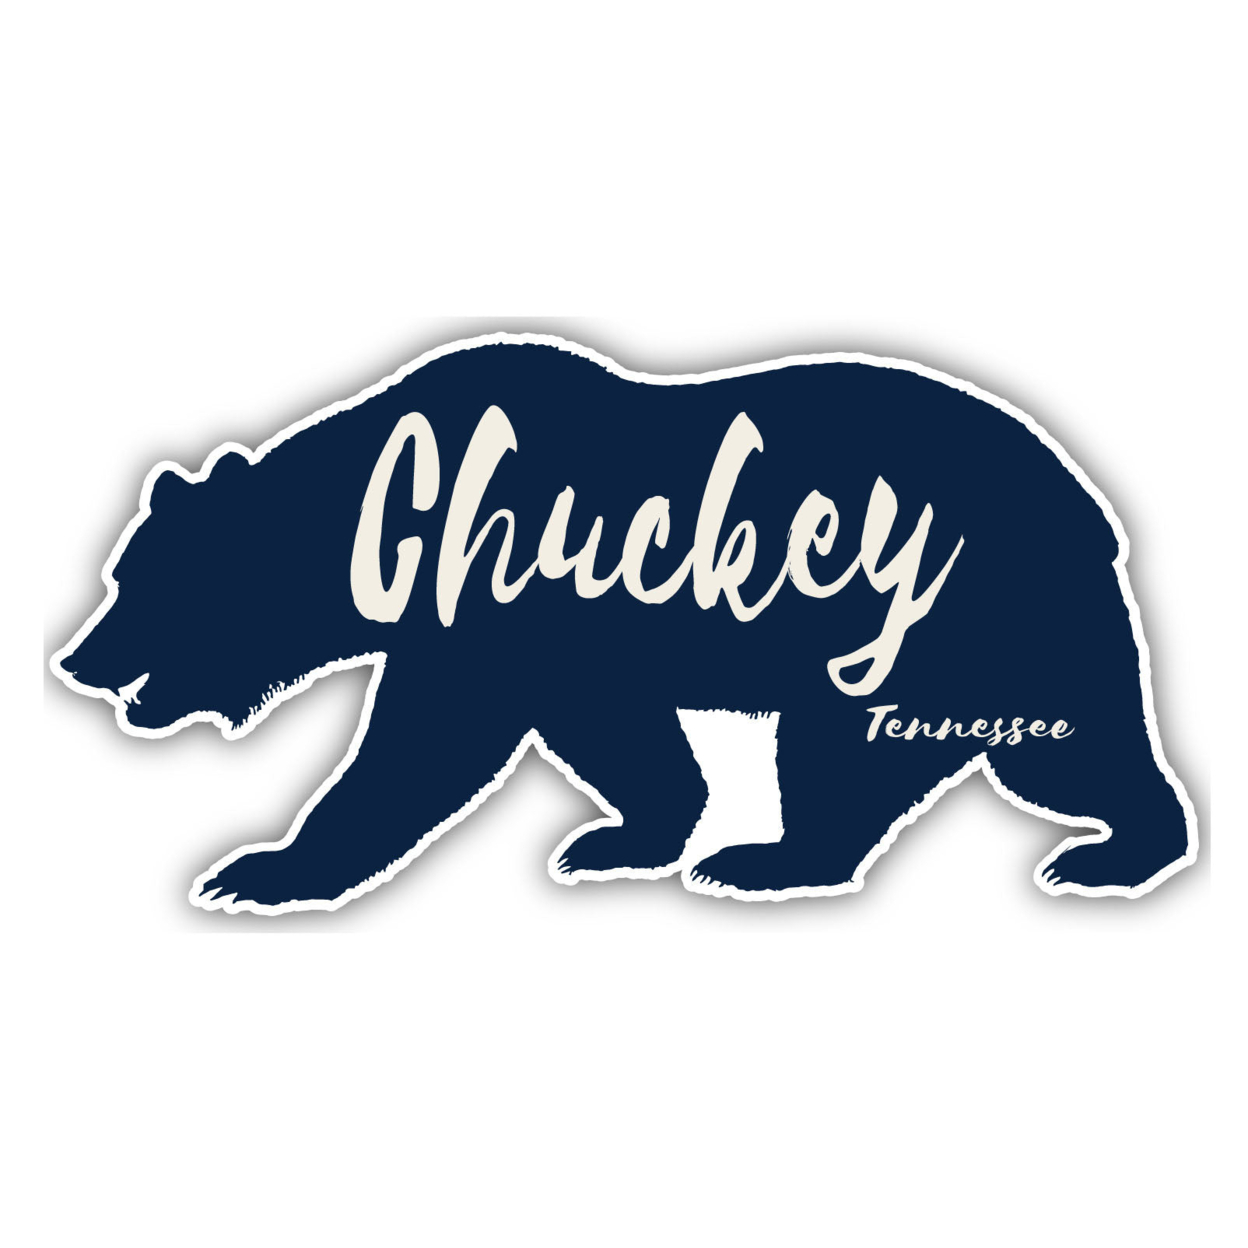 Chuckey Tennessee Souvenir Decorative Stickers (Choose Theme And Size) - 4-Pack, 10-Inch, Bear